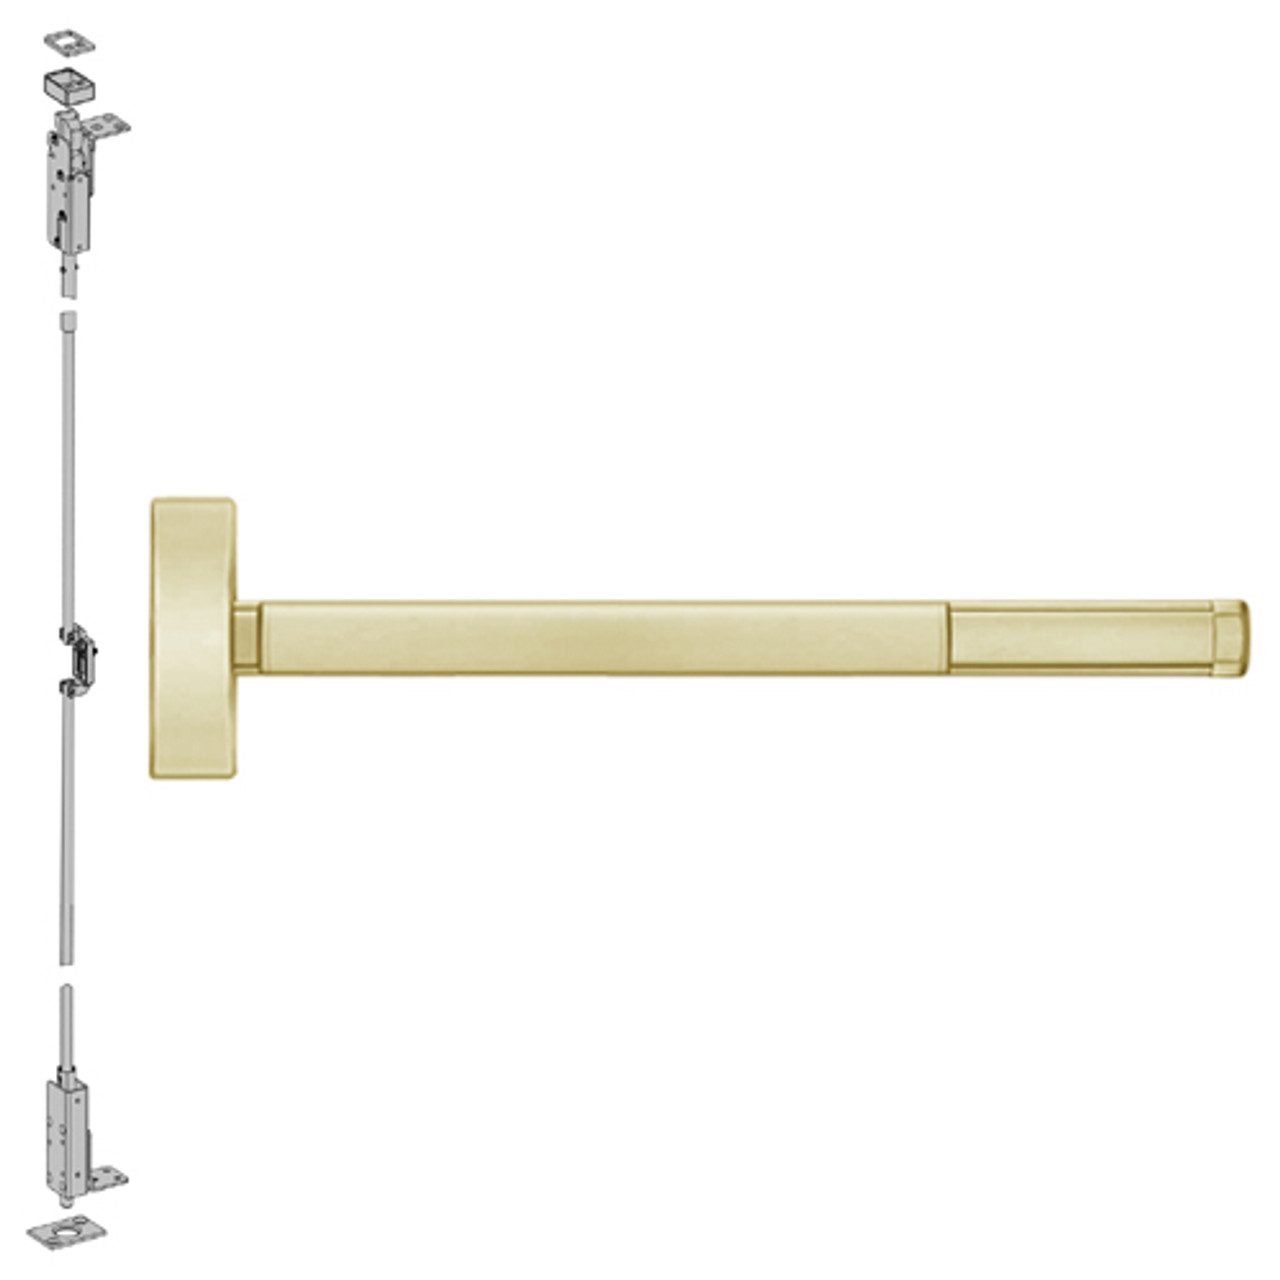 TSFL2708LBR-606-48 PHI 2700 Series Wood Door Concealed Vertical Exit Device with Touchbar Monitoring Switch Prepped for Key Controls Lever-Knob in Satin Brass Finish